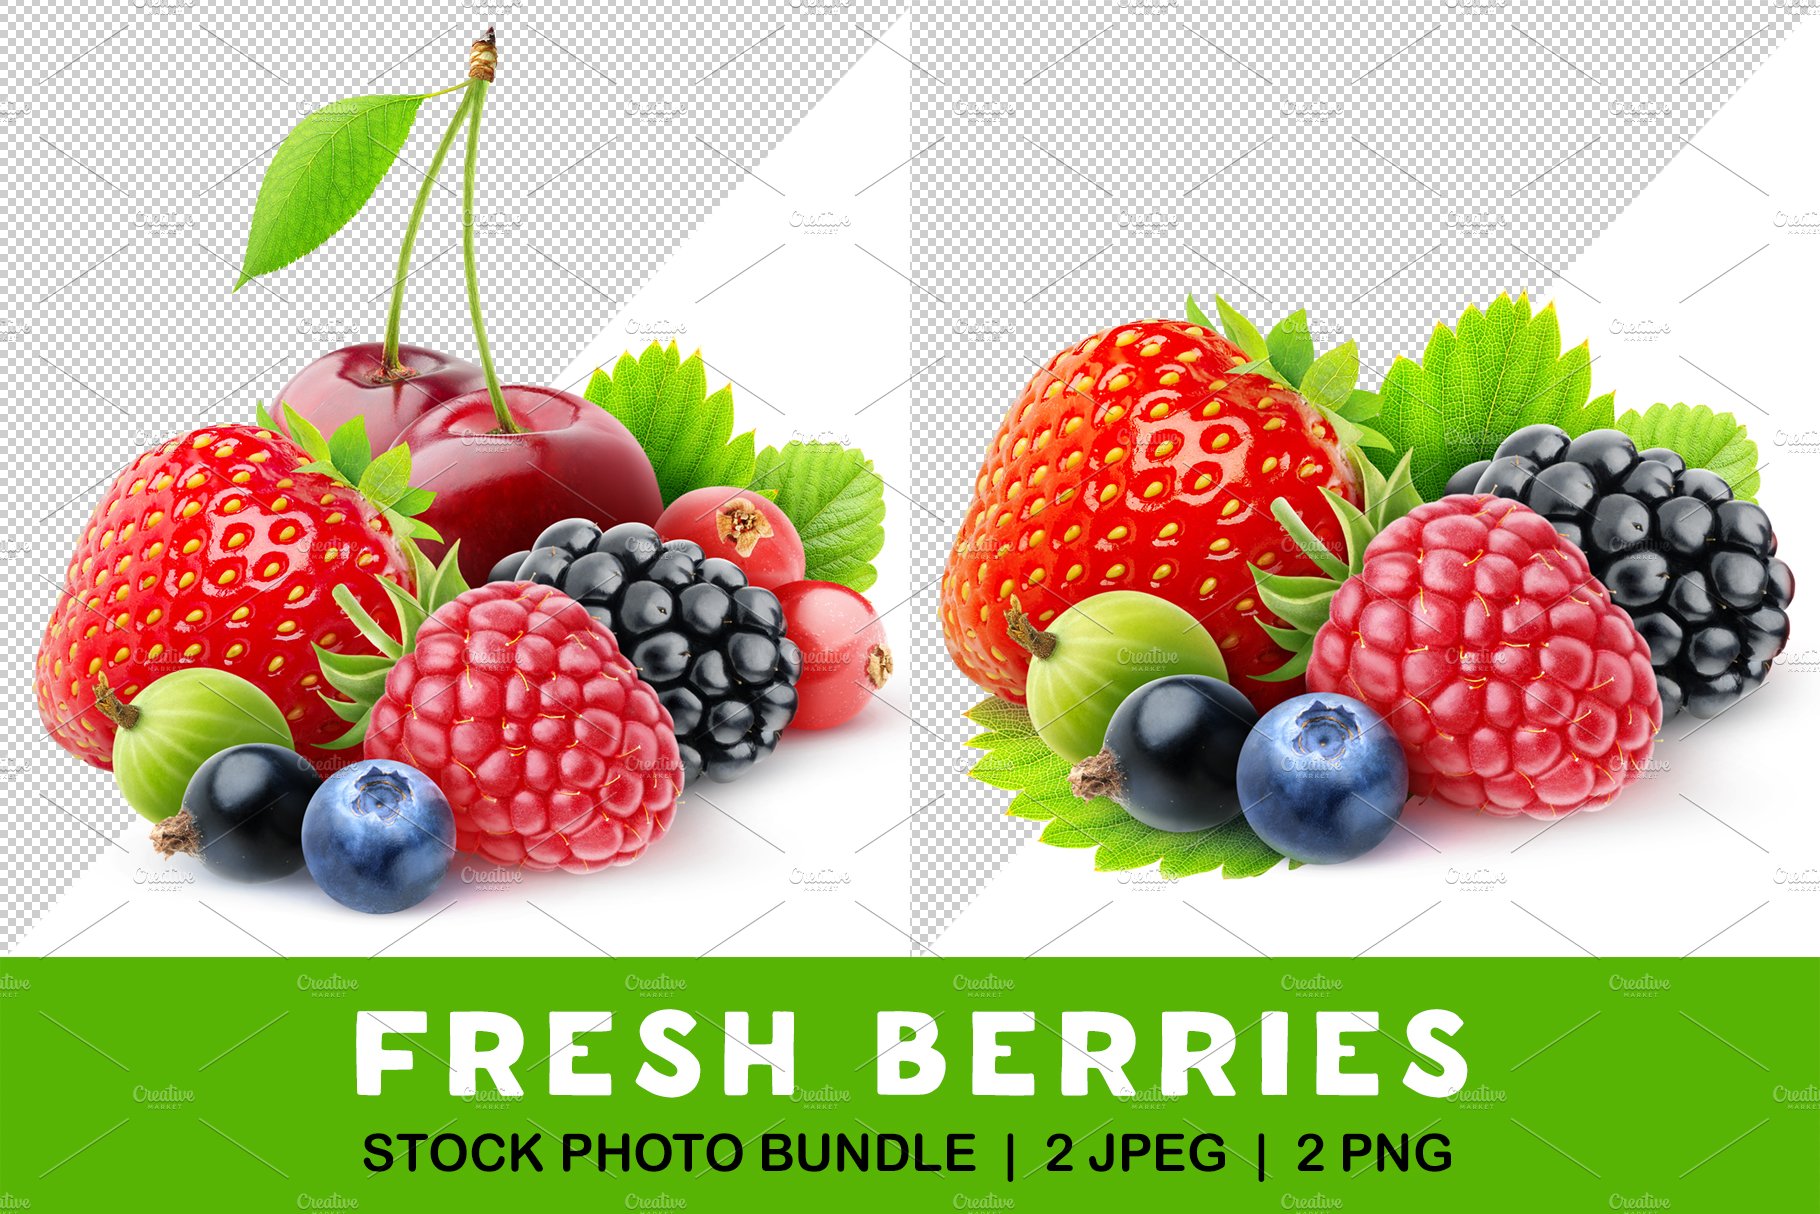 Berries in a pile cover image.